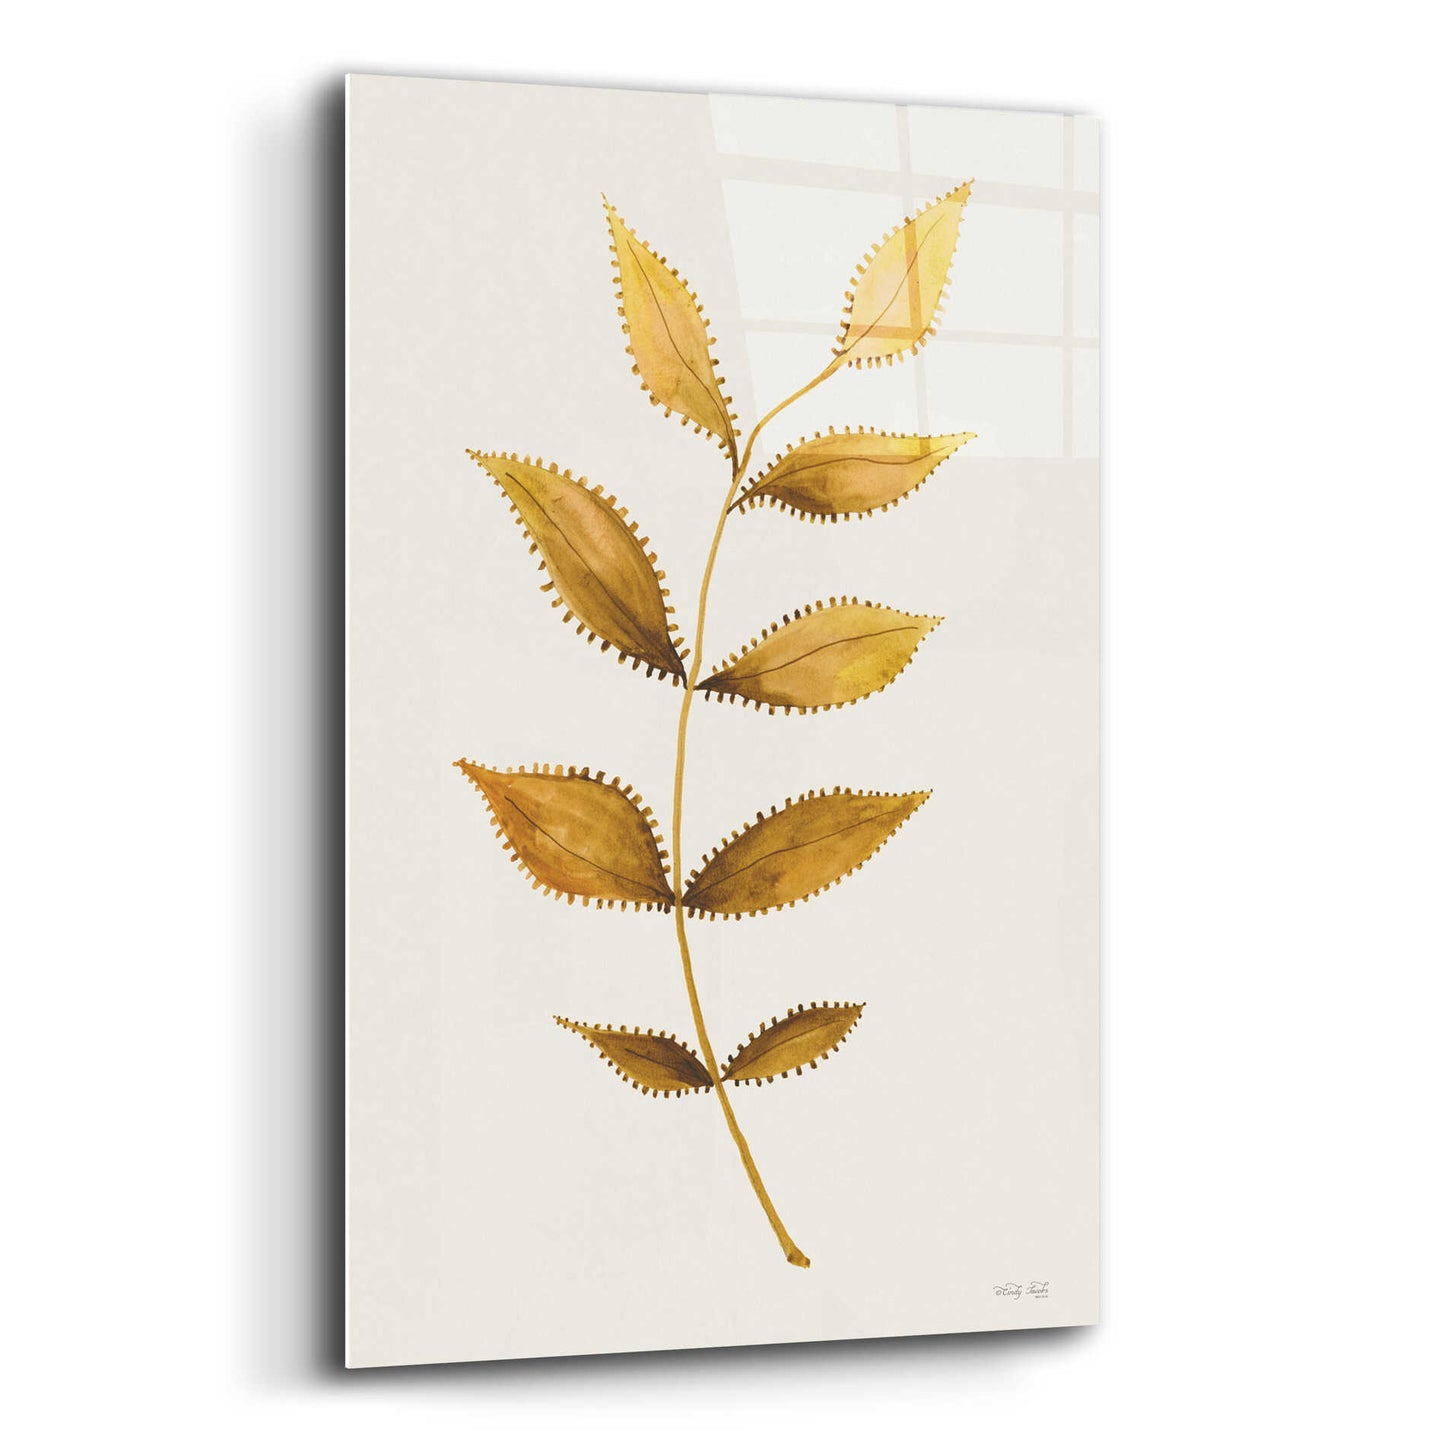 Epic Art 'Golden Spotted Leaves' by Cindy Jacobs, Acrylic Glass Wall Art,16x24